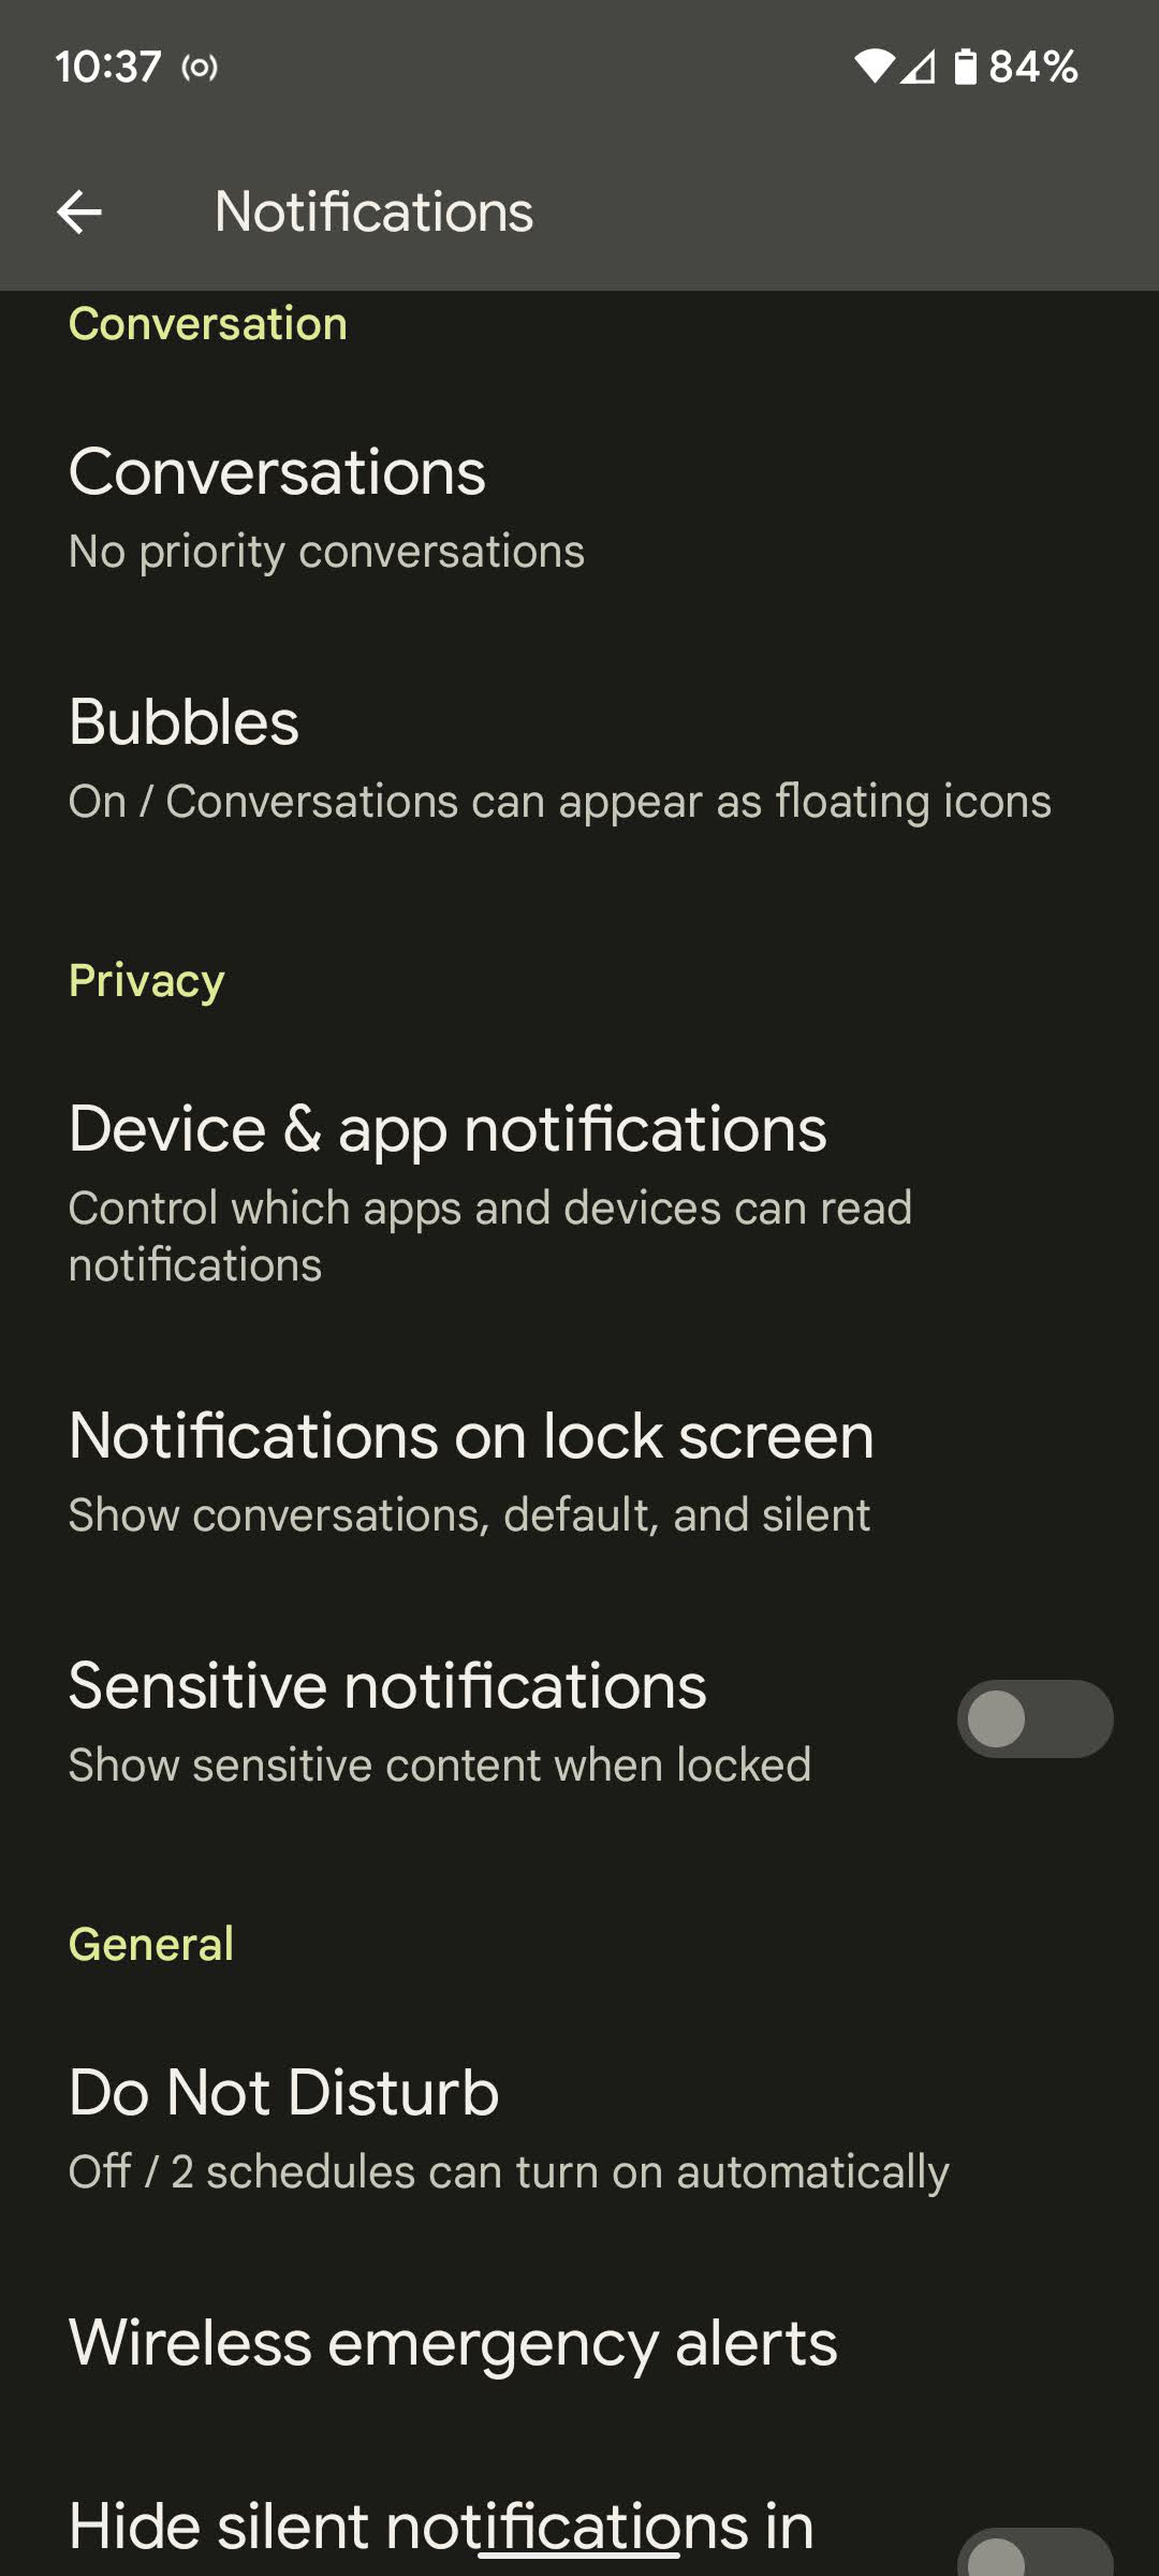 Select Notifications on lock screen to enable that feature